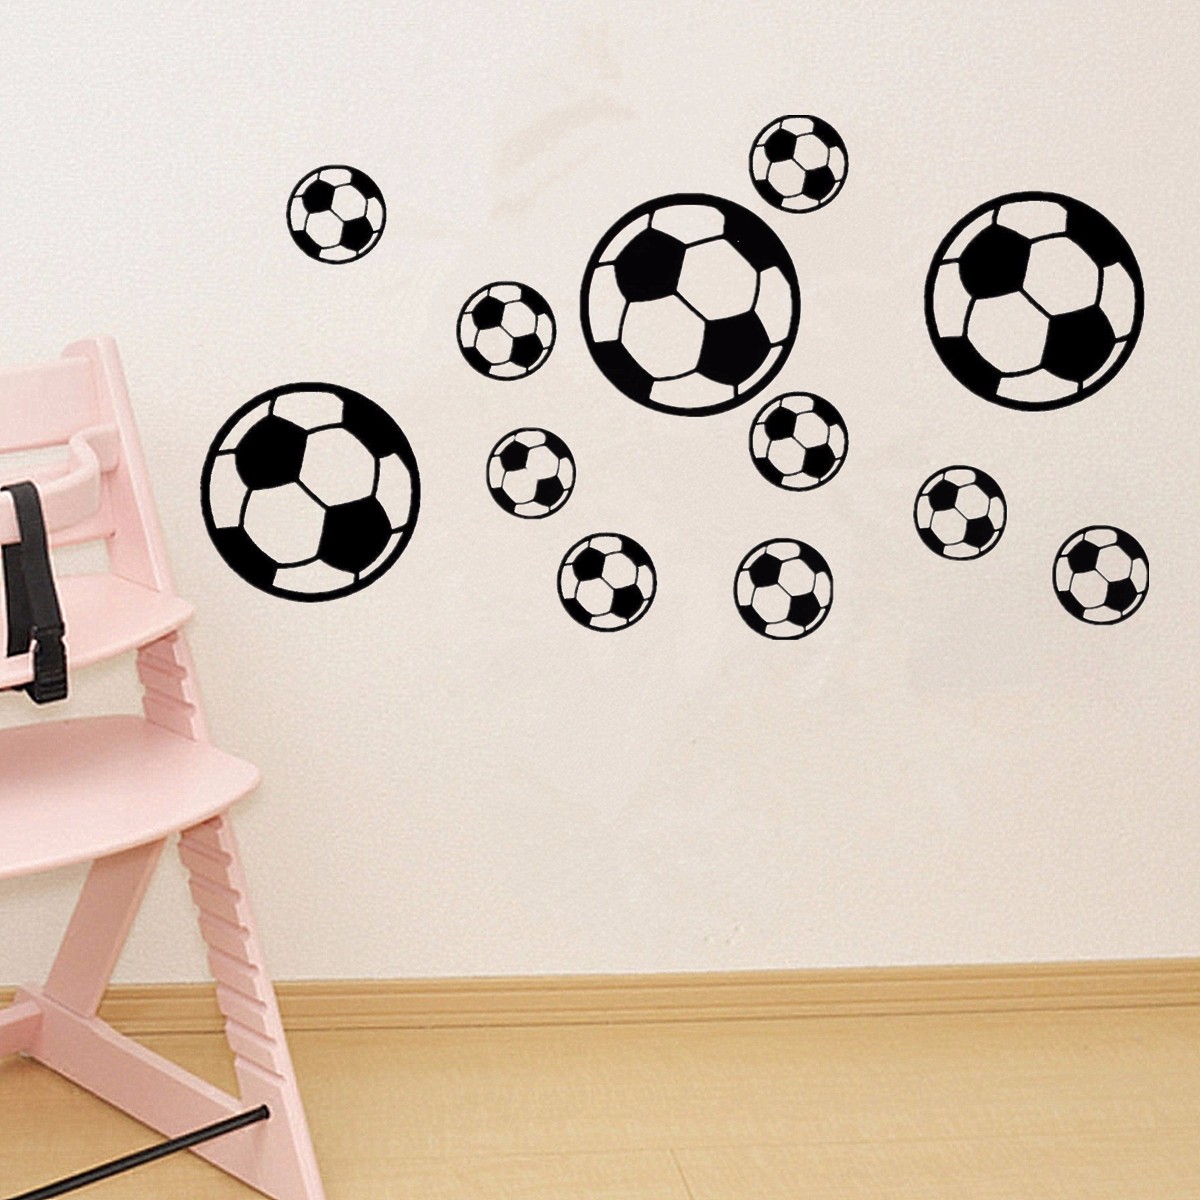 12PcsSet-Football-Soccer-Wall-Stickers-Children-Nursery-Kids-Room-Decals-Gift-Home-Decorations-1470248-9